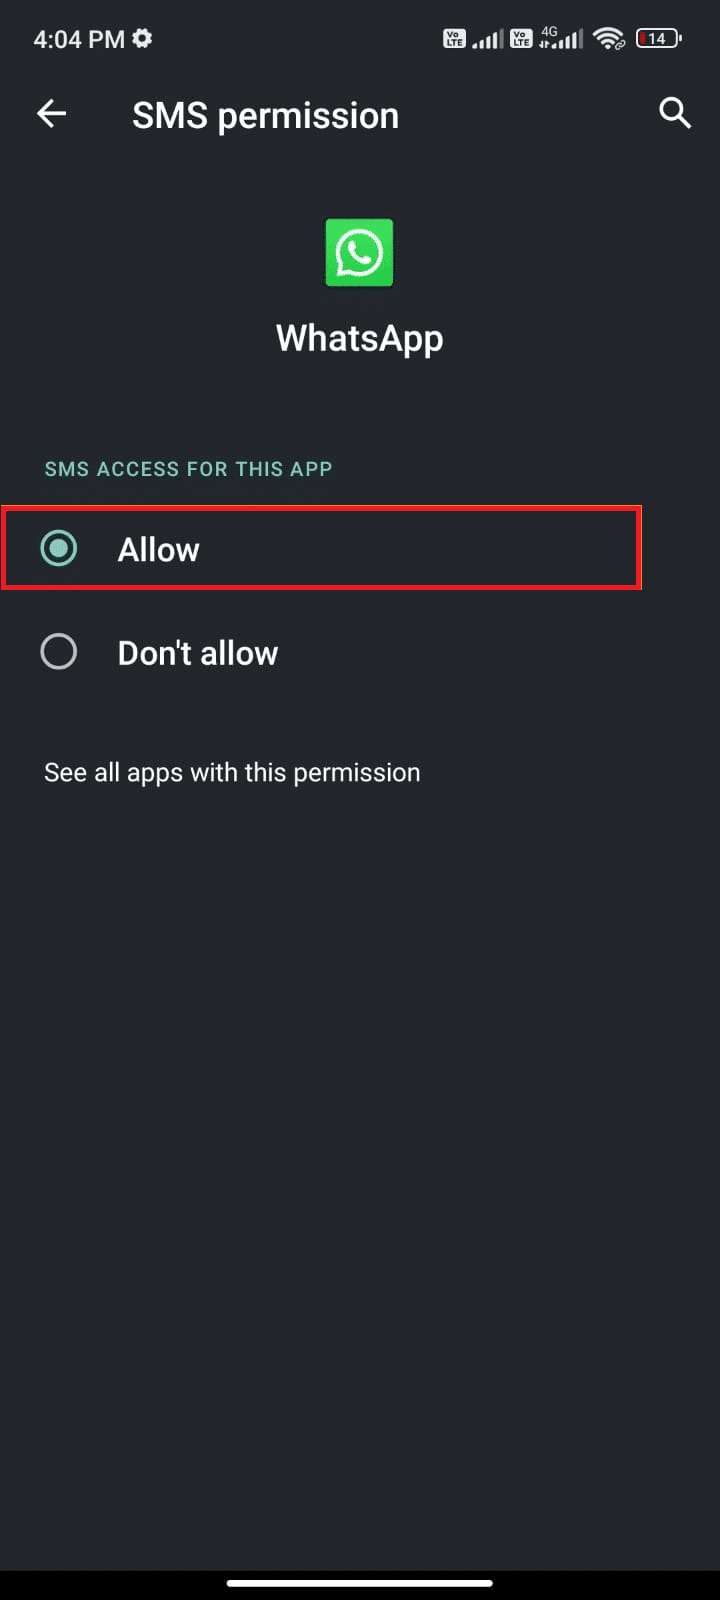 tap allow option to access that permission